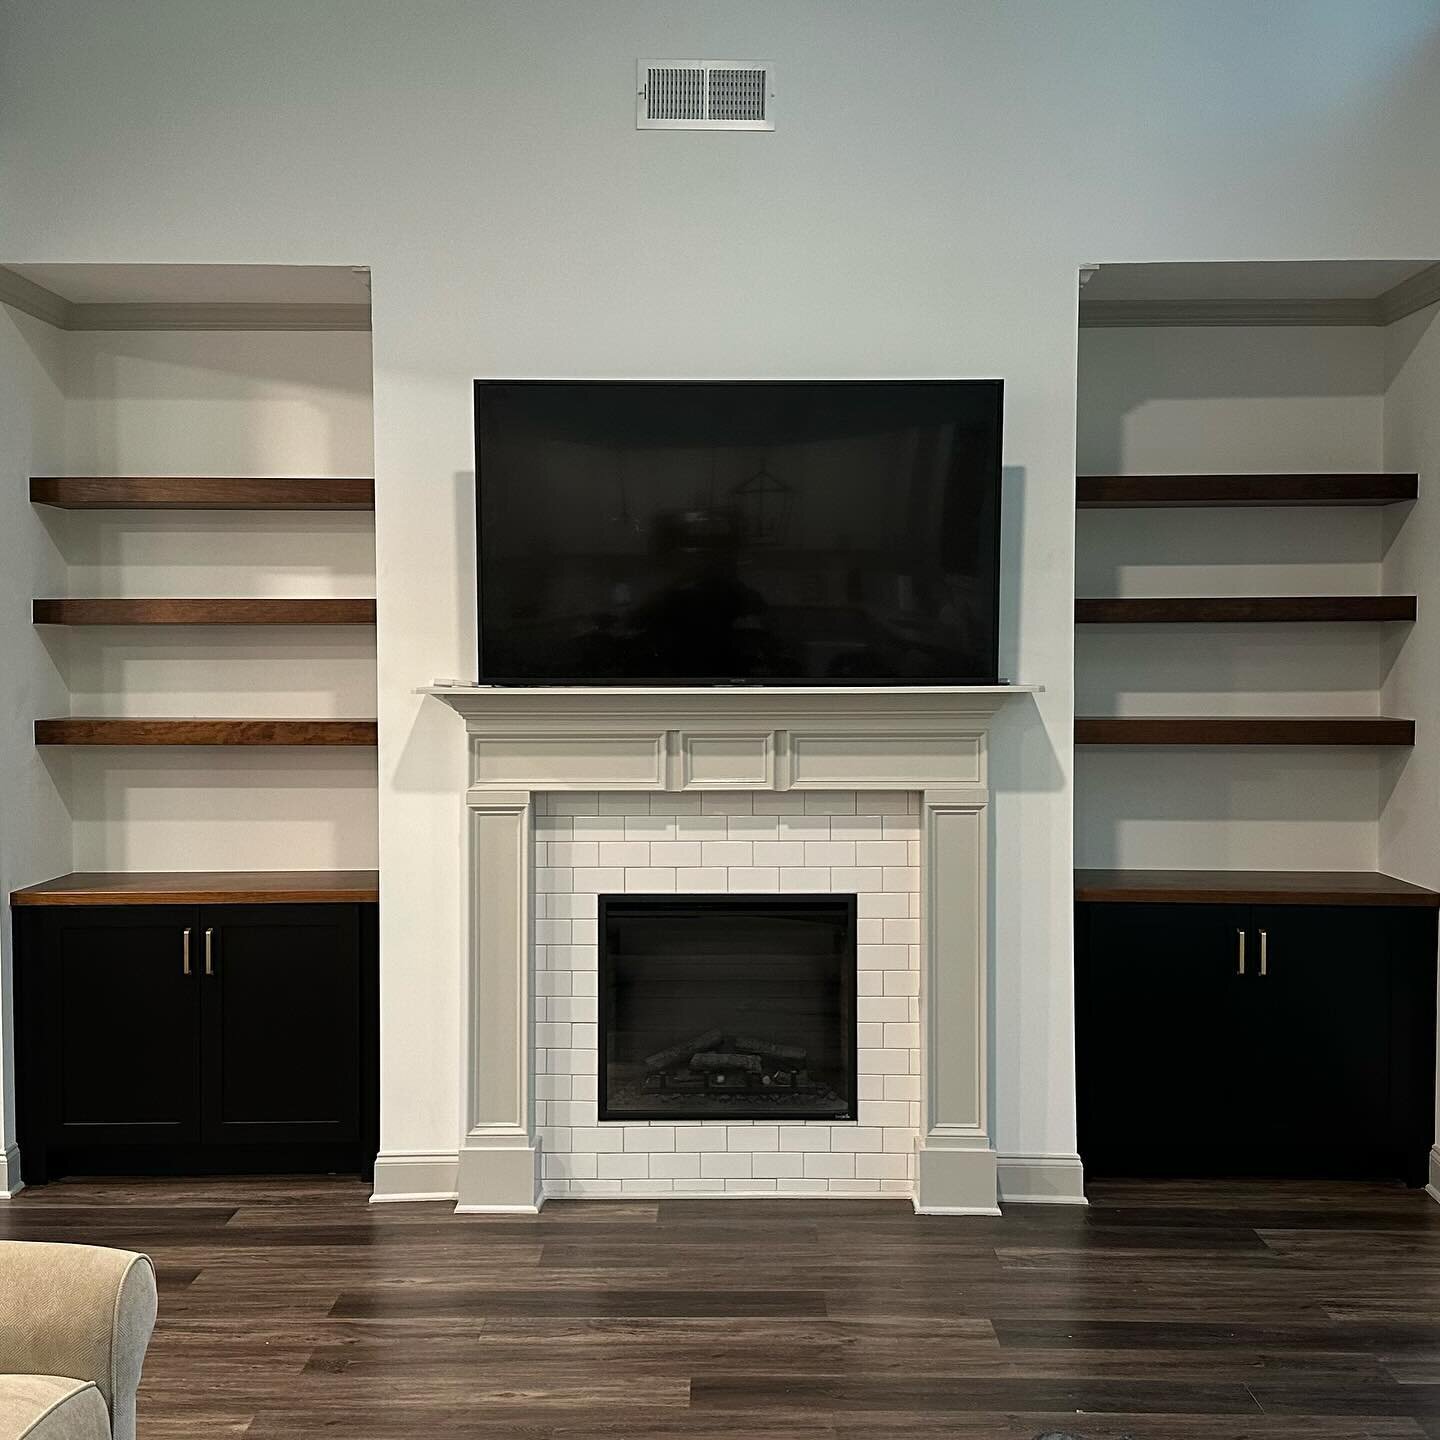 Black cabinets, brass hardware, stained cherry tops and floating shelves are all that was needed to make this living room complete ✅
&bull;
Dead space areas like this are all over homes. A simple base cabinet and shelves creates a ton of storage and 